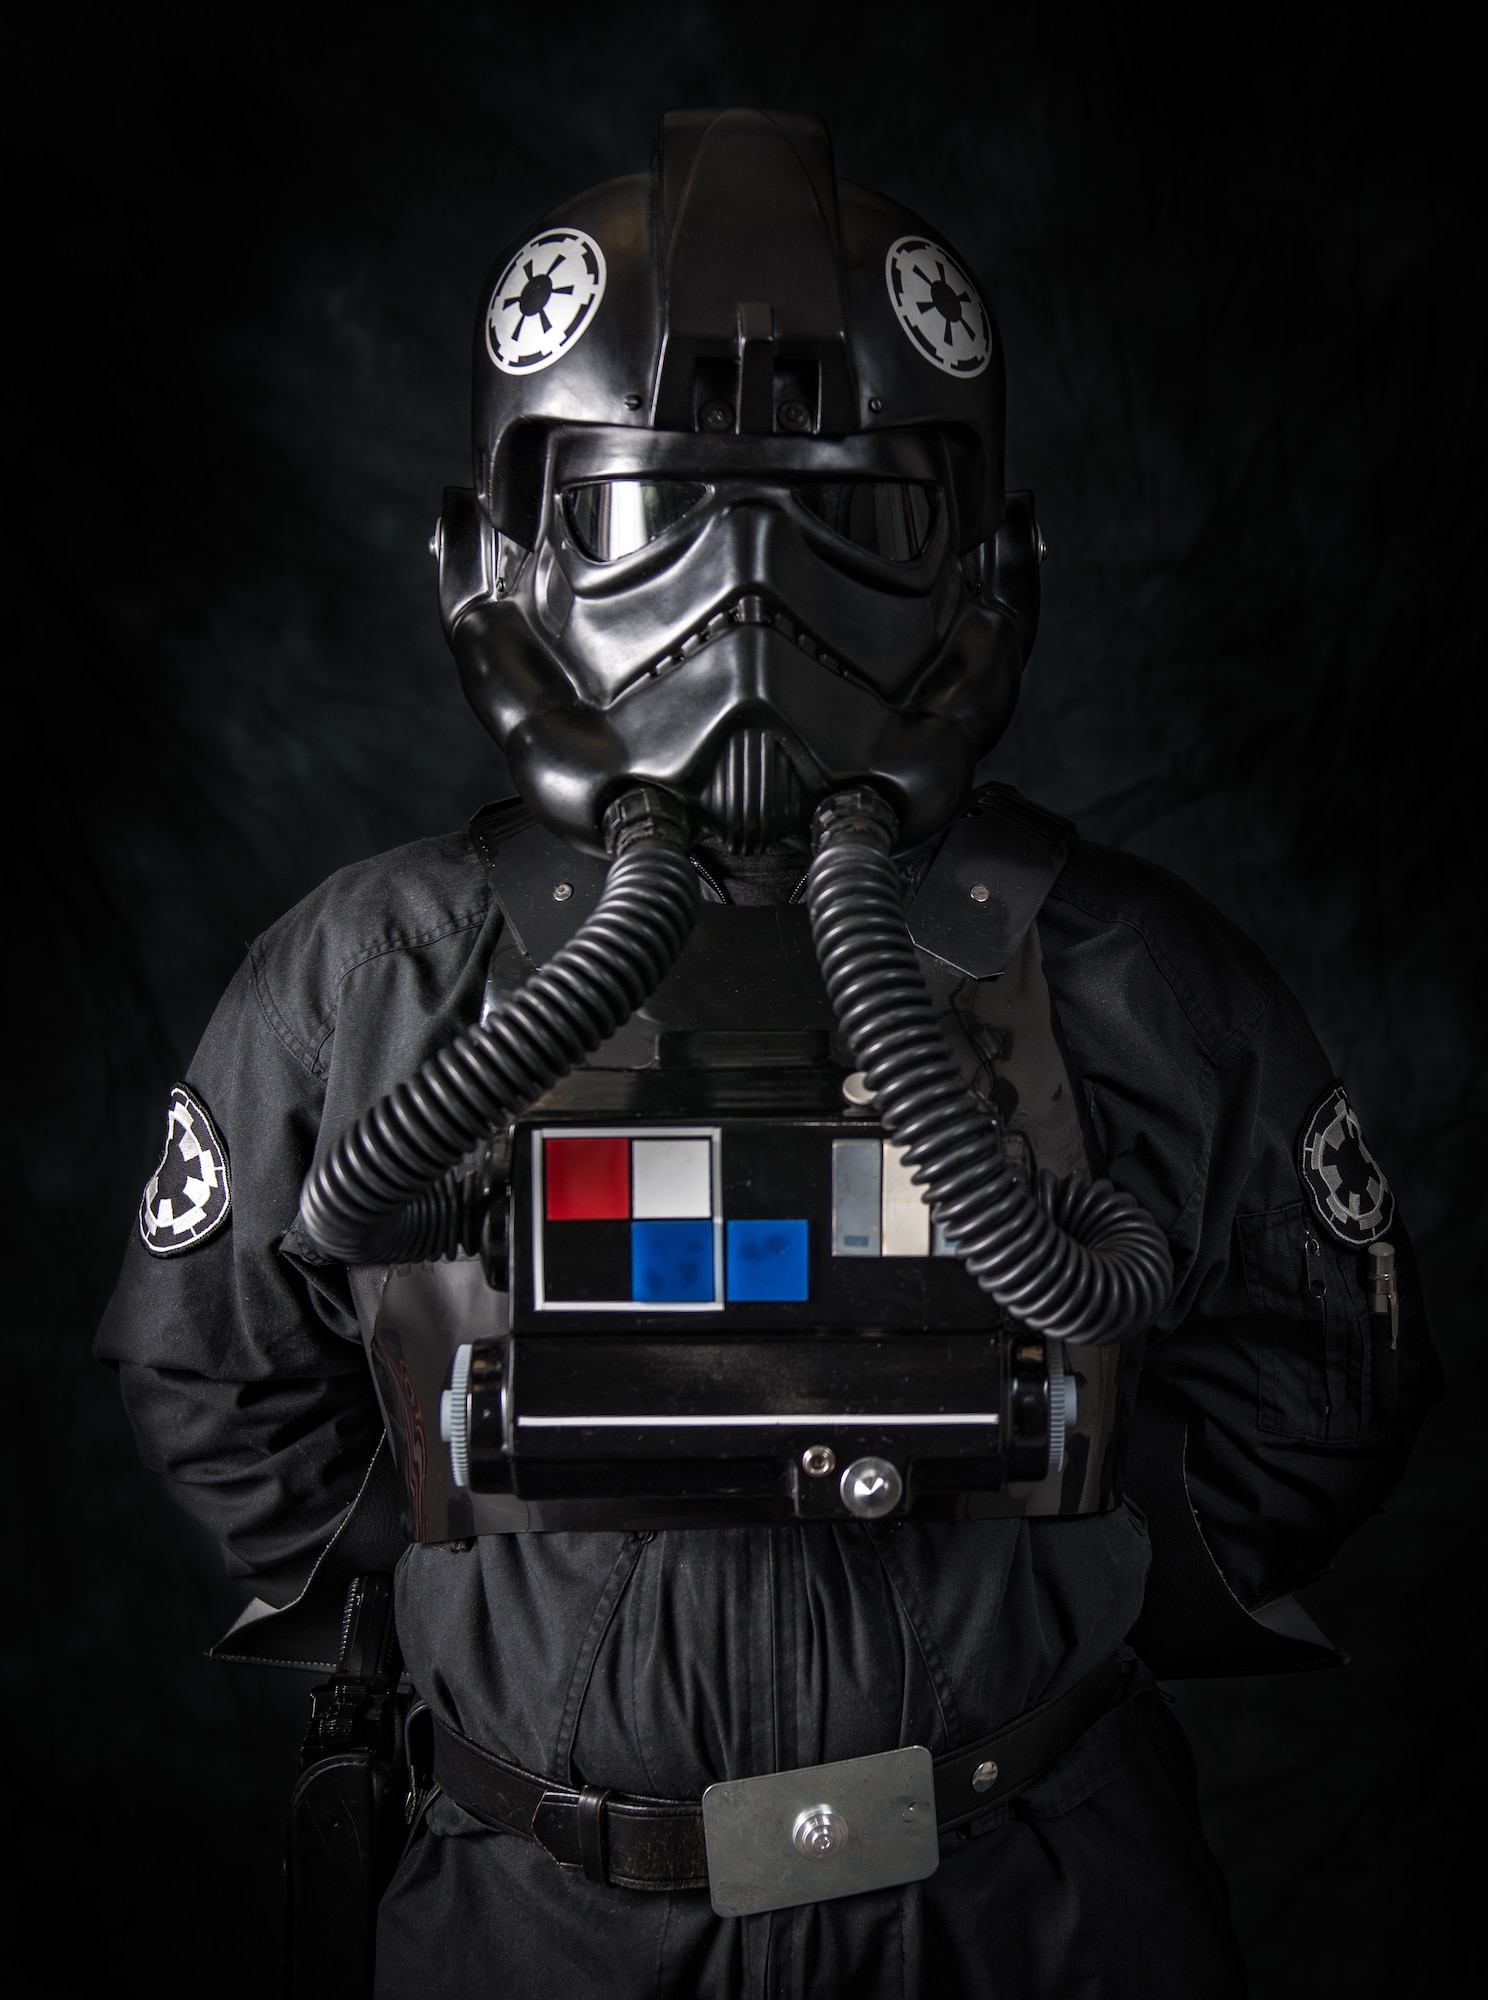 Tech. Sgt. Chris Fagan poses for a portrait in his Star Wars Tie Fighter Pilot costume